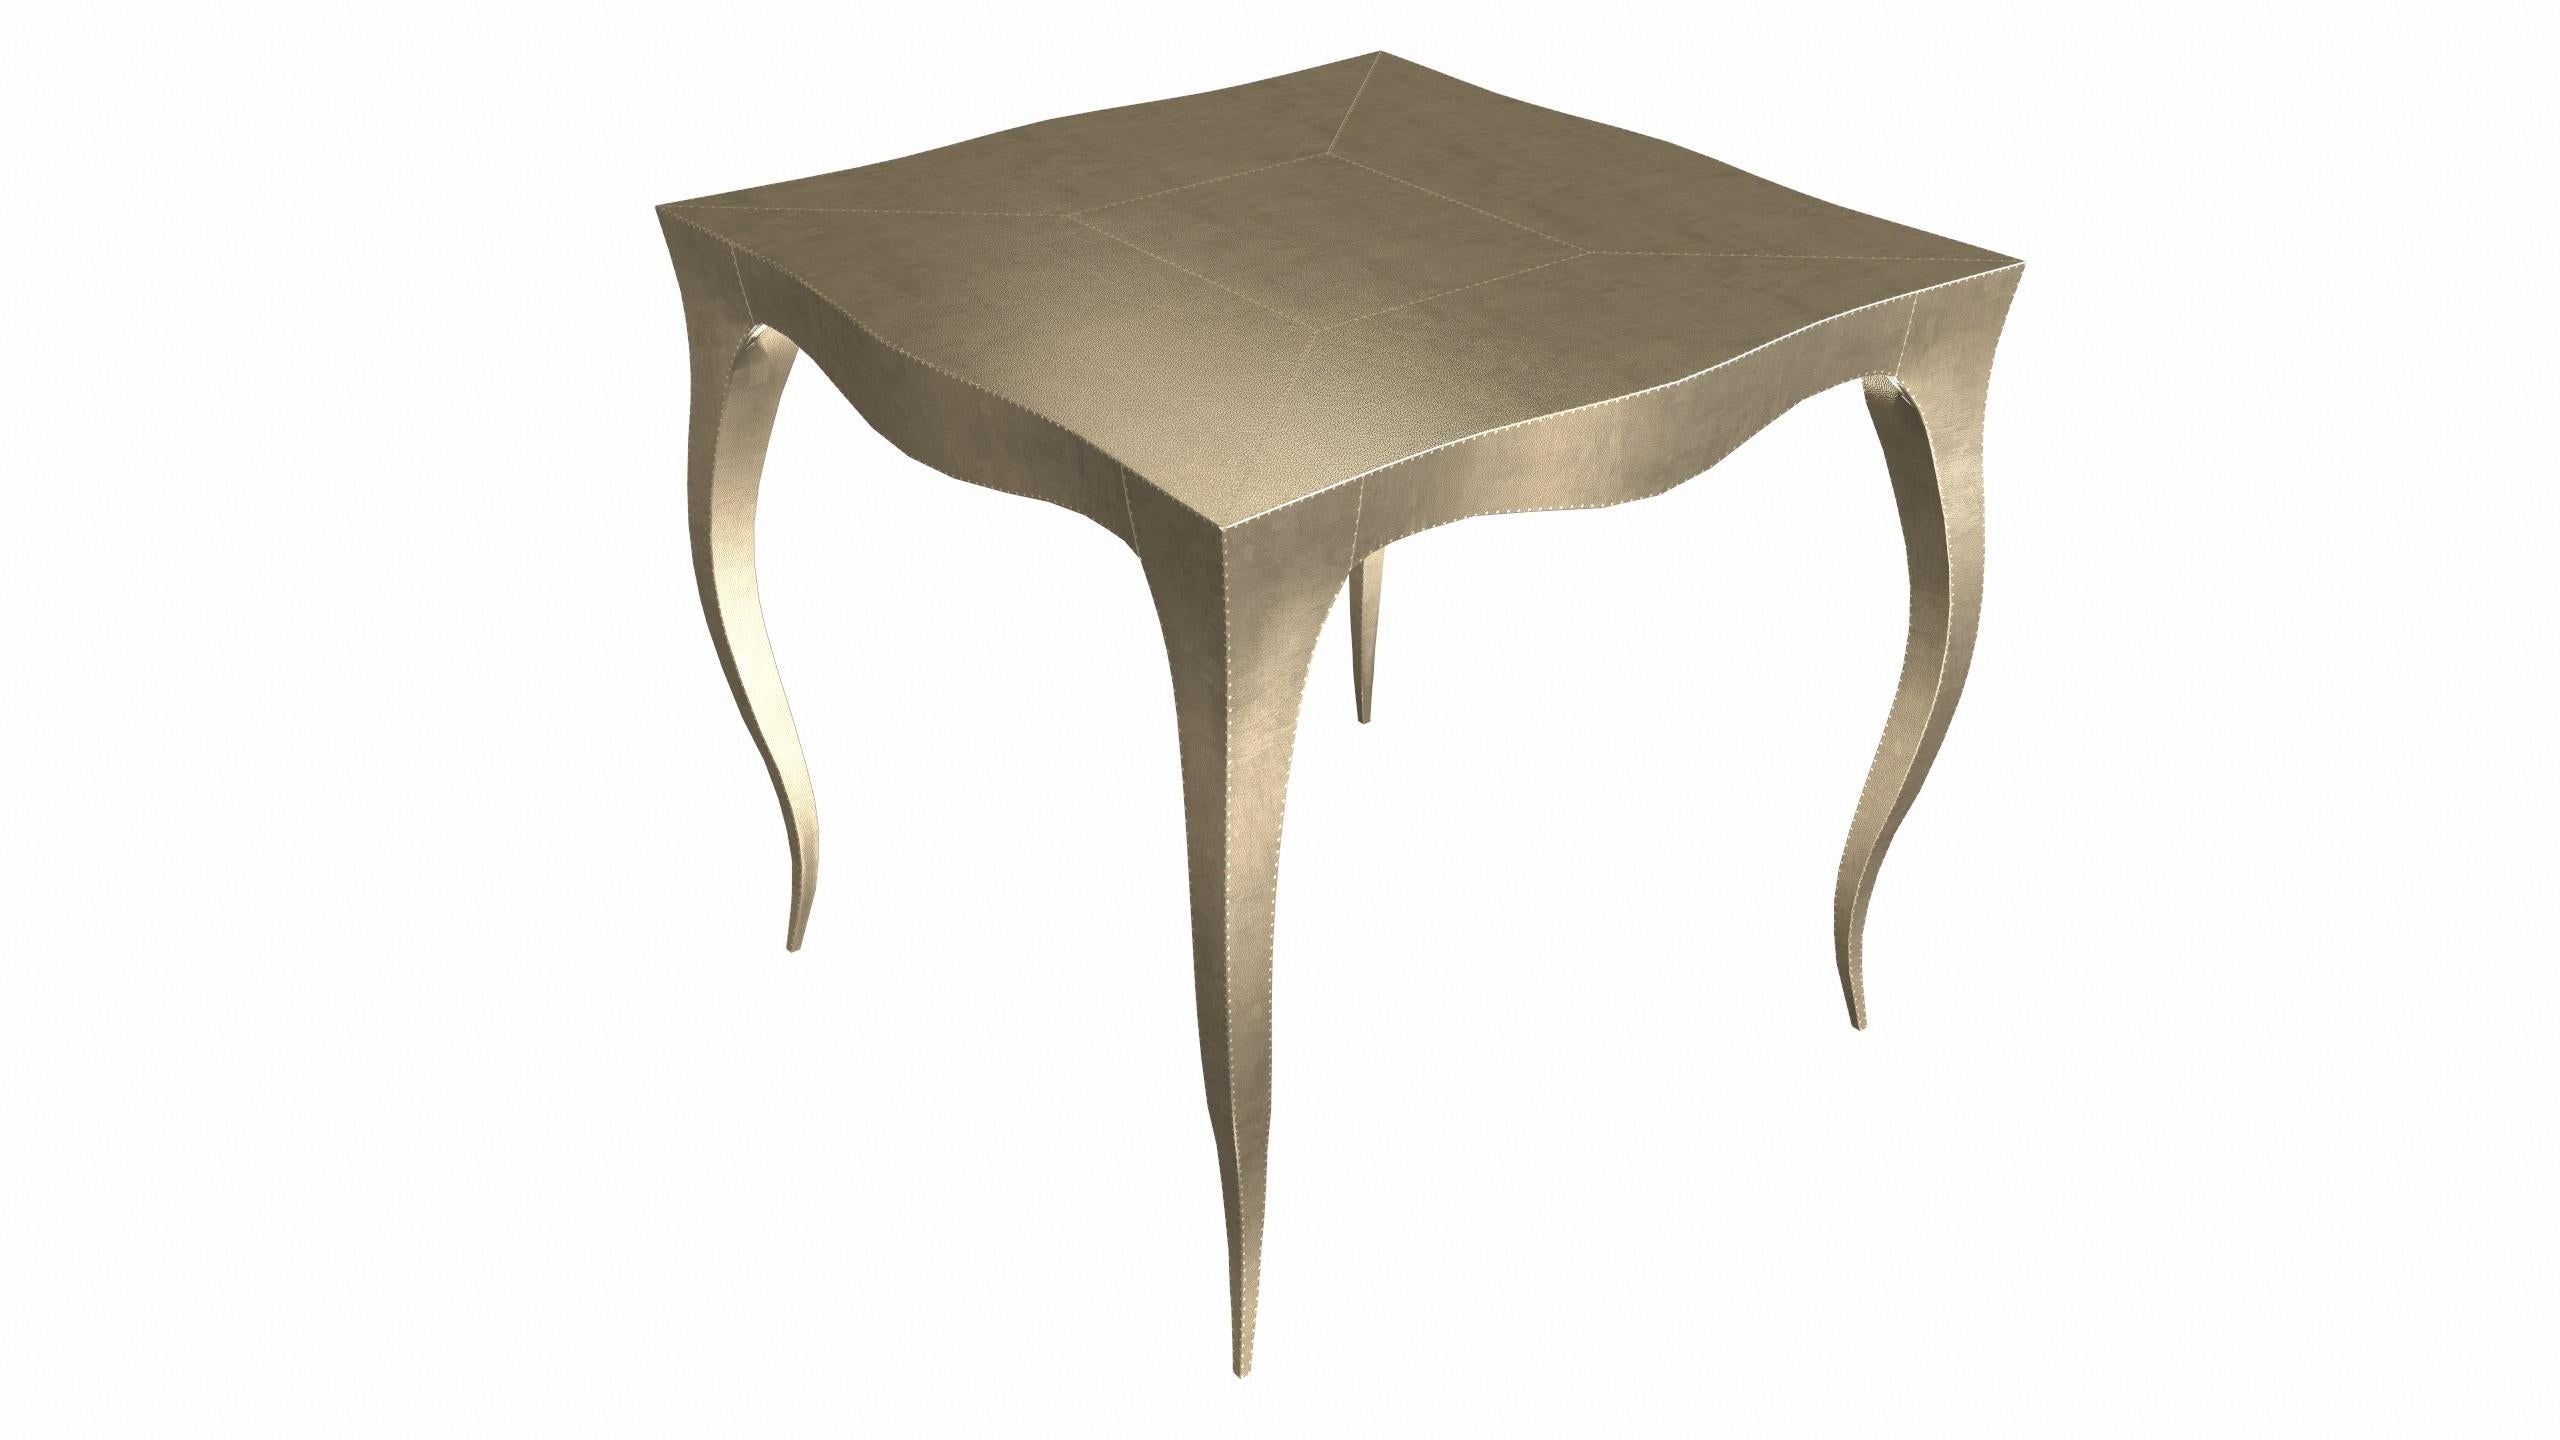 Metal Louise Art Deco Industrial and Work Tables Mid. Hammered Brass by Paul Mathieu For Sale